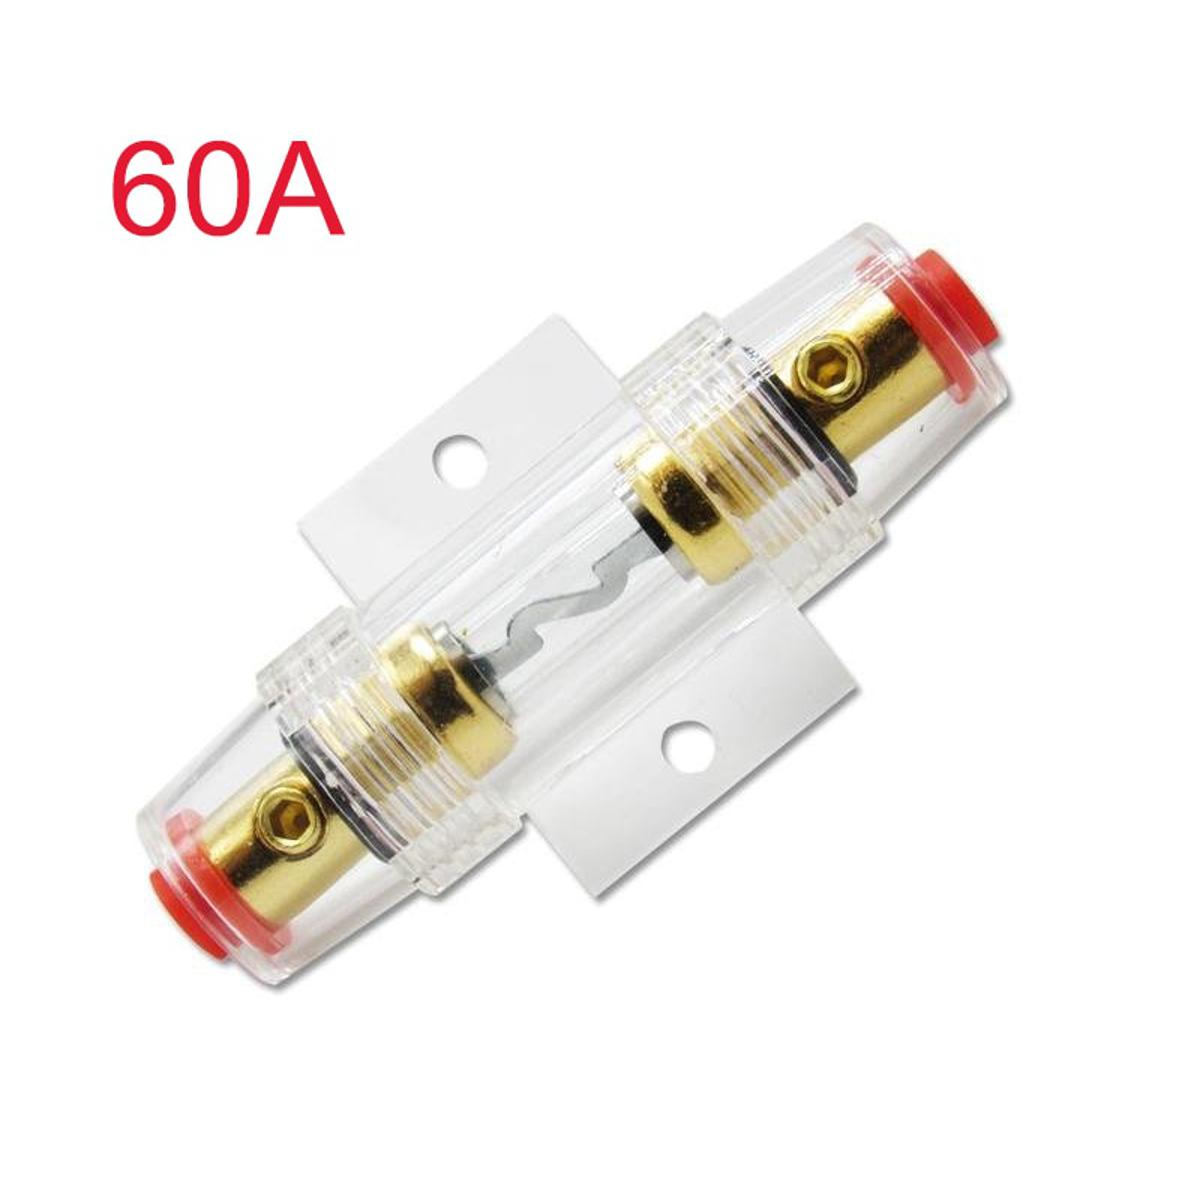 1pcs Car Audio Refit Fuse Holder 4/8 And 10 Gauge Wire With 60 AMP Fuses  60A/80A Fuse Holder For Car Audio Auto Amplifier Army Green